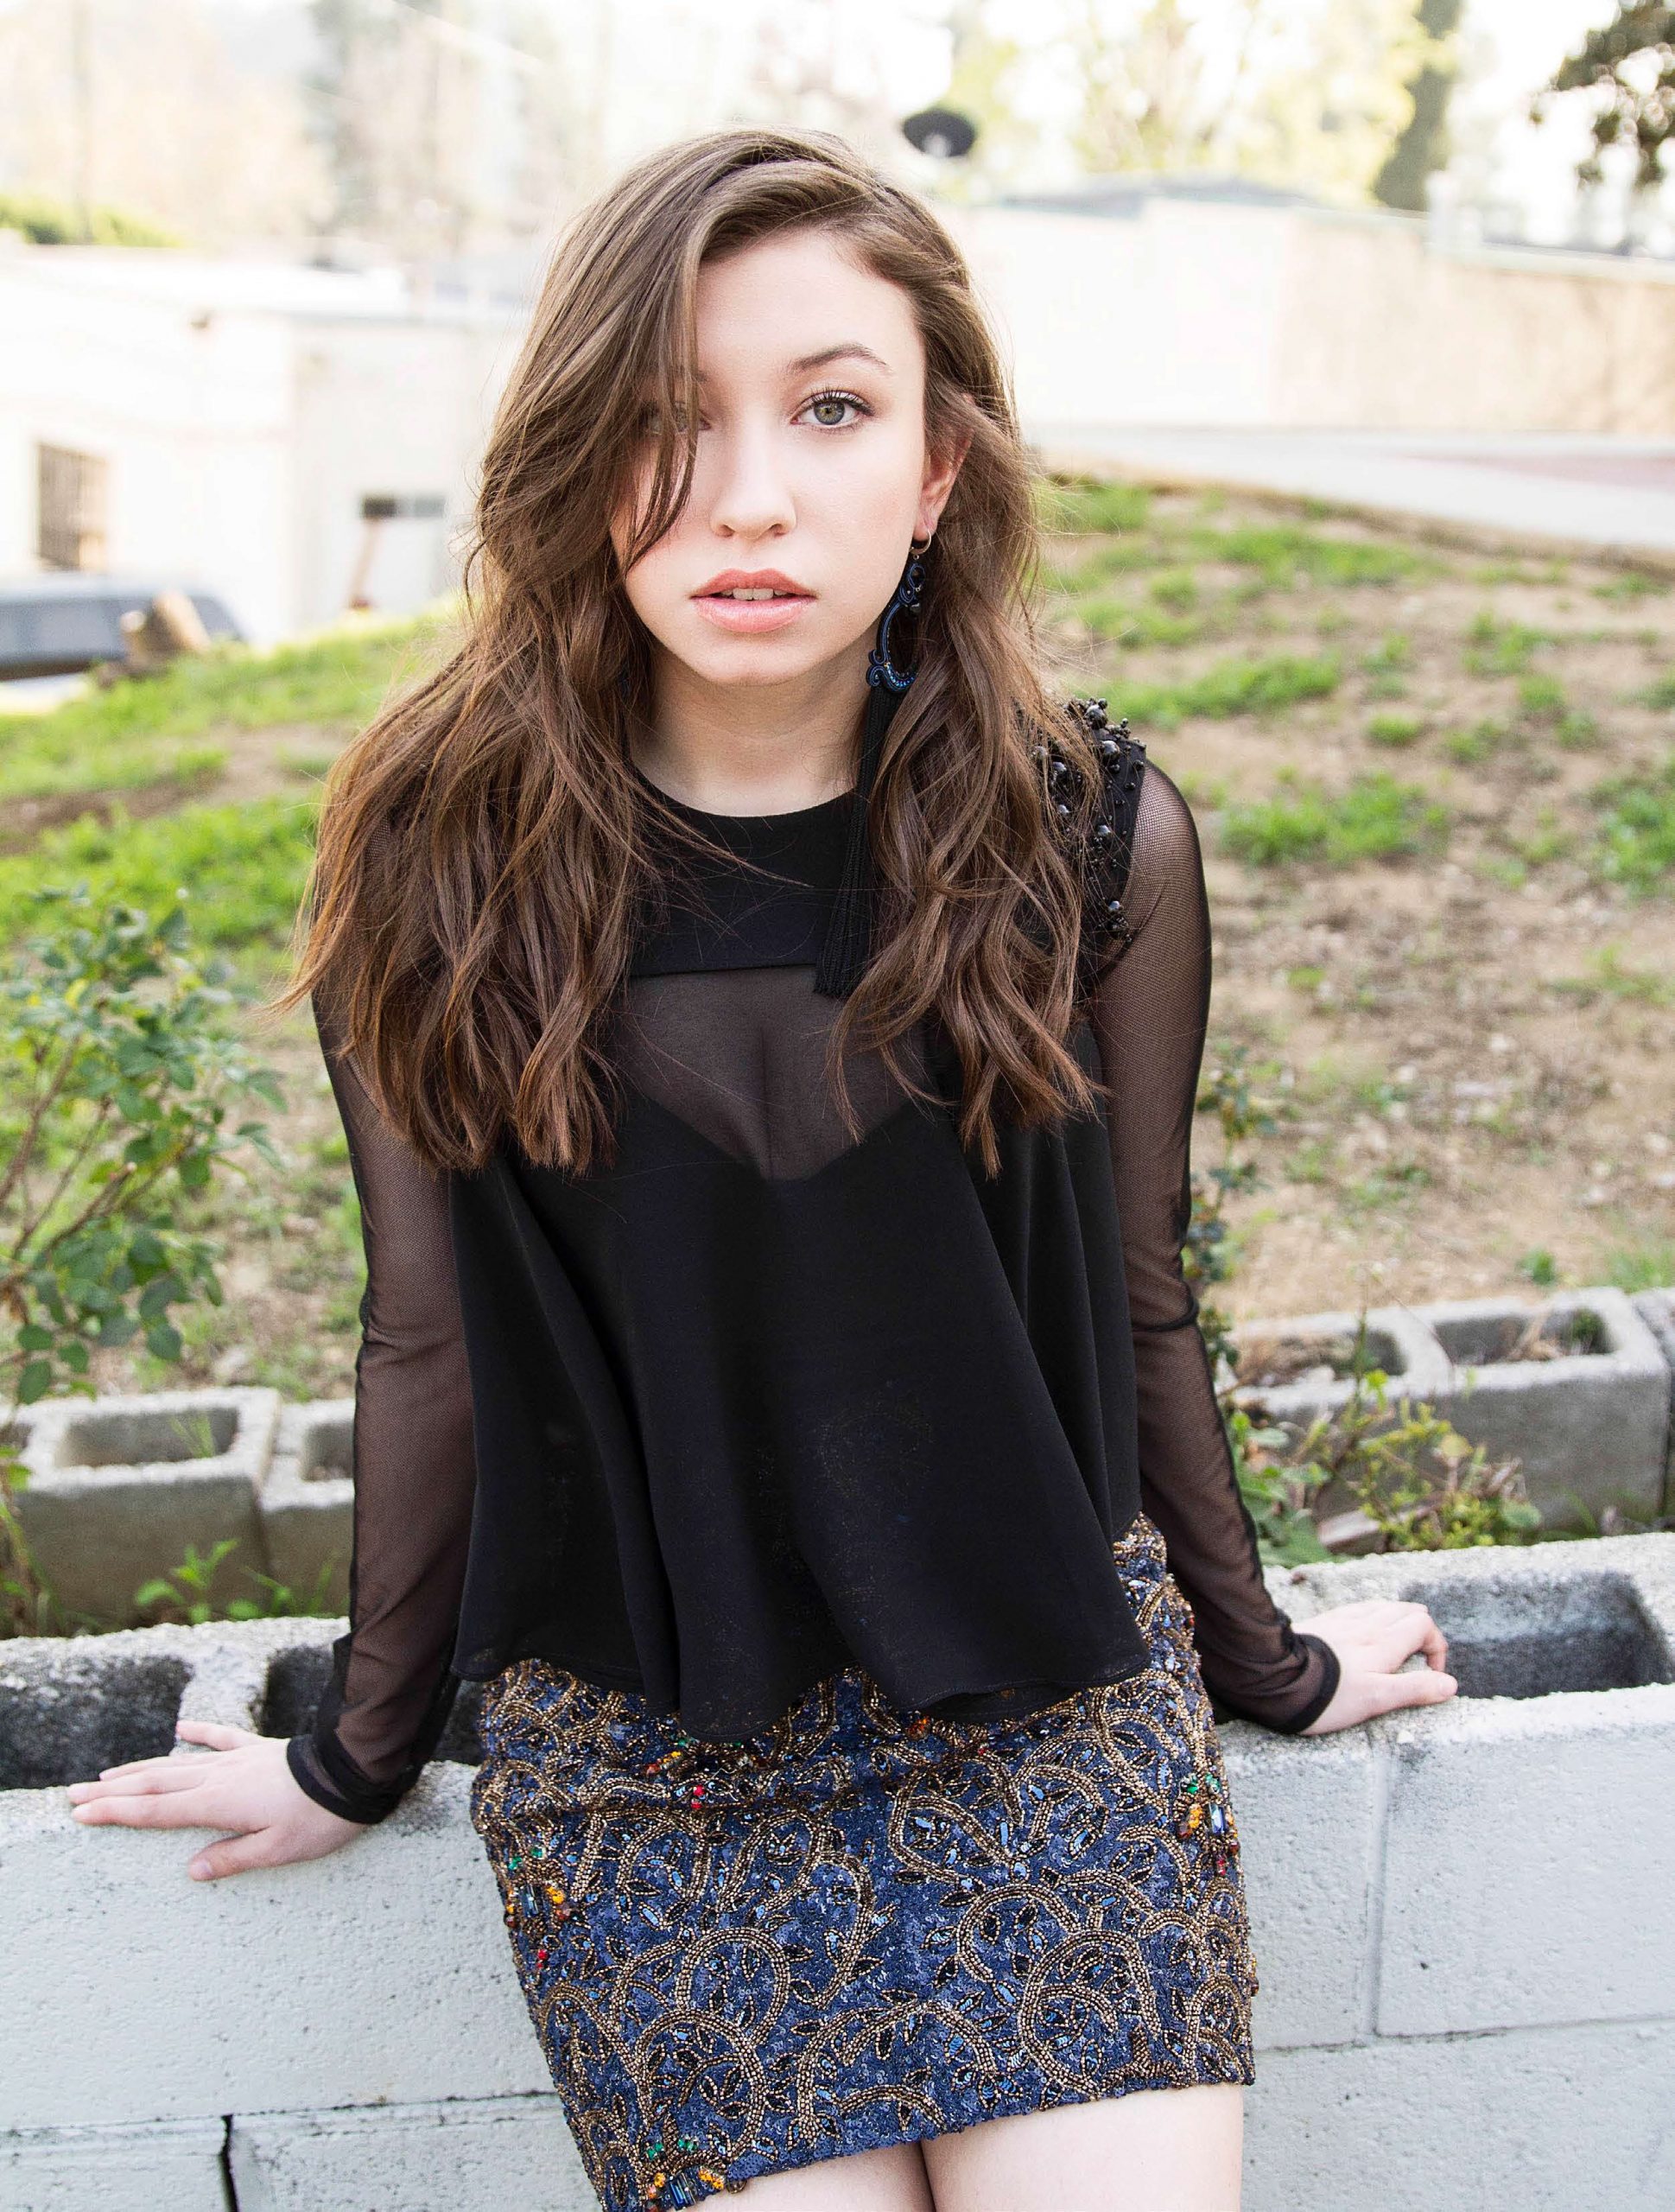 50 Katelyn Nacon Nude Pictures Which Prove Beauty Beyond Recognition 392